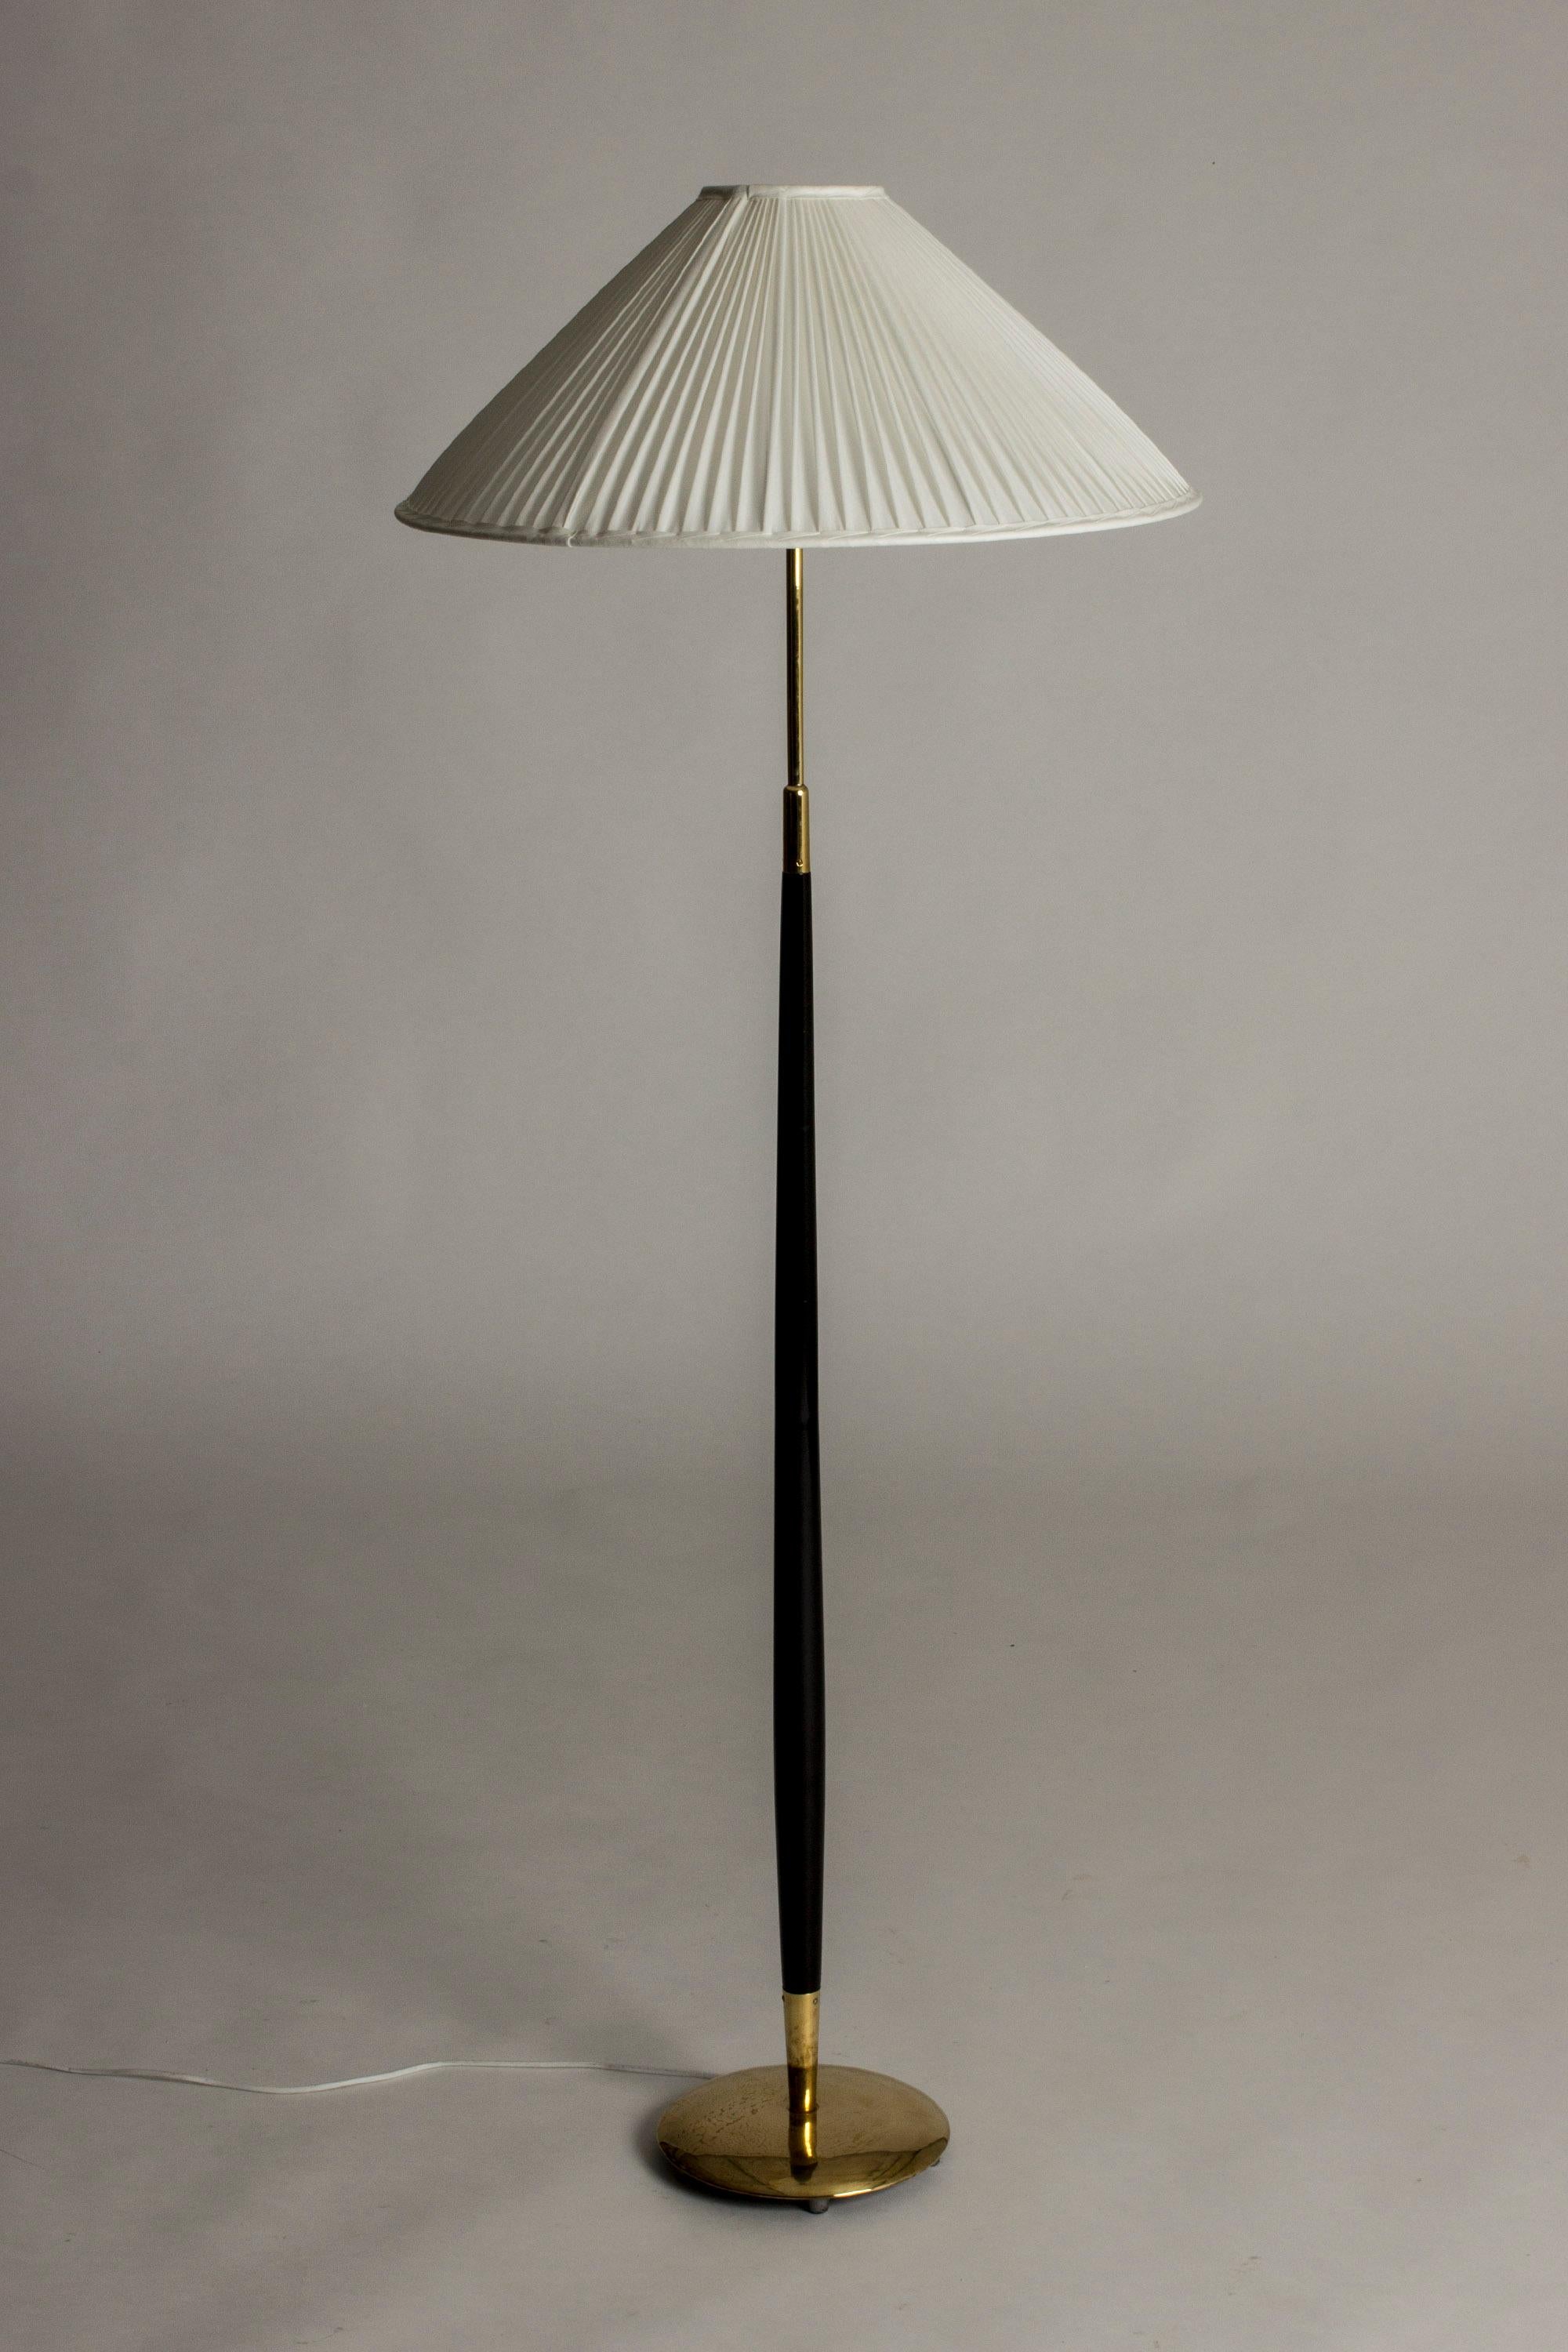 Elegant floor lamp by Bertil Brisborg, with a tapering black lacquered pole and brass base. Beautiful wide shade, made from white pleated fabric.